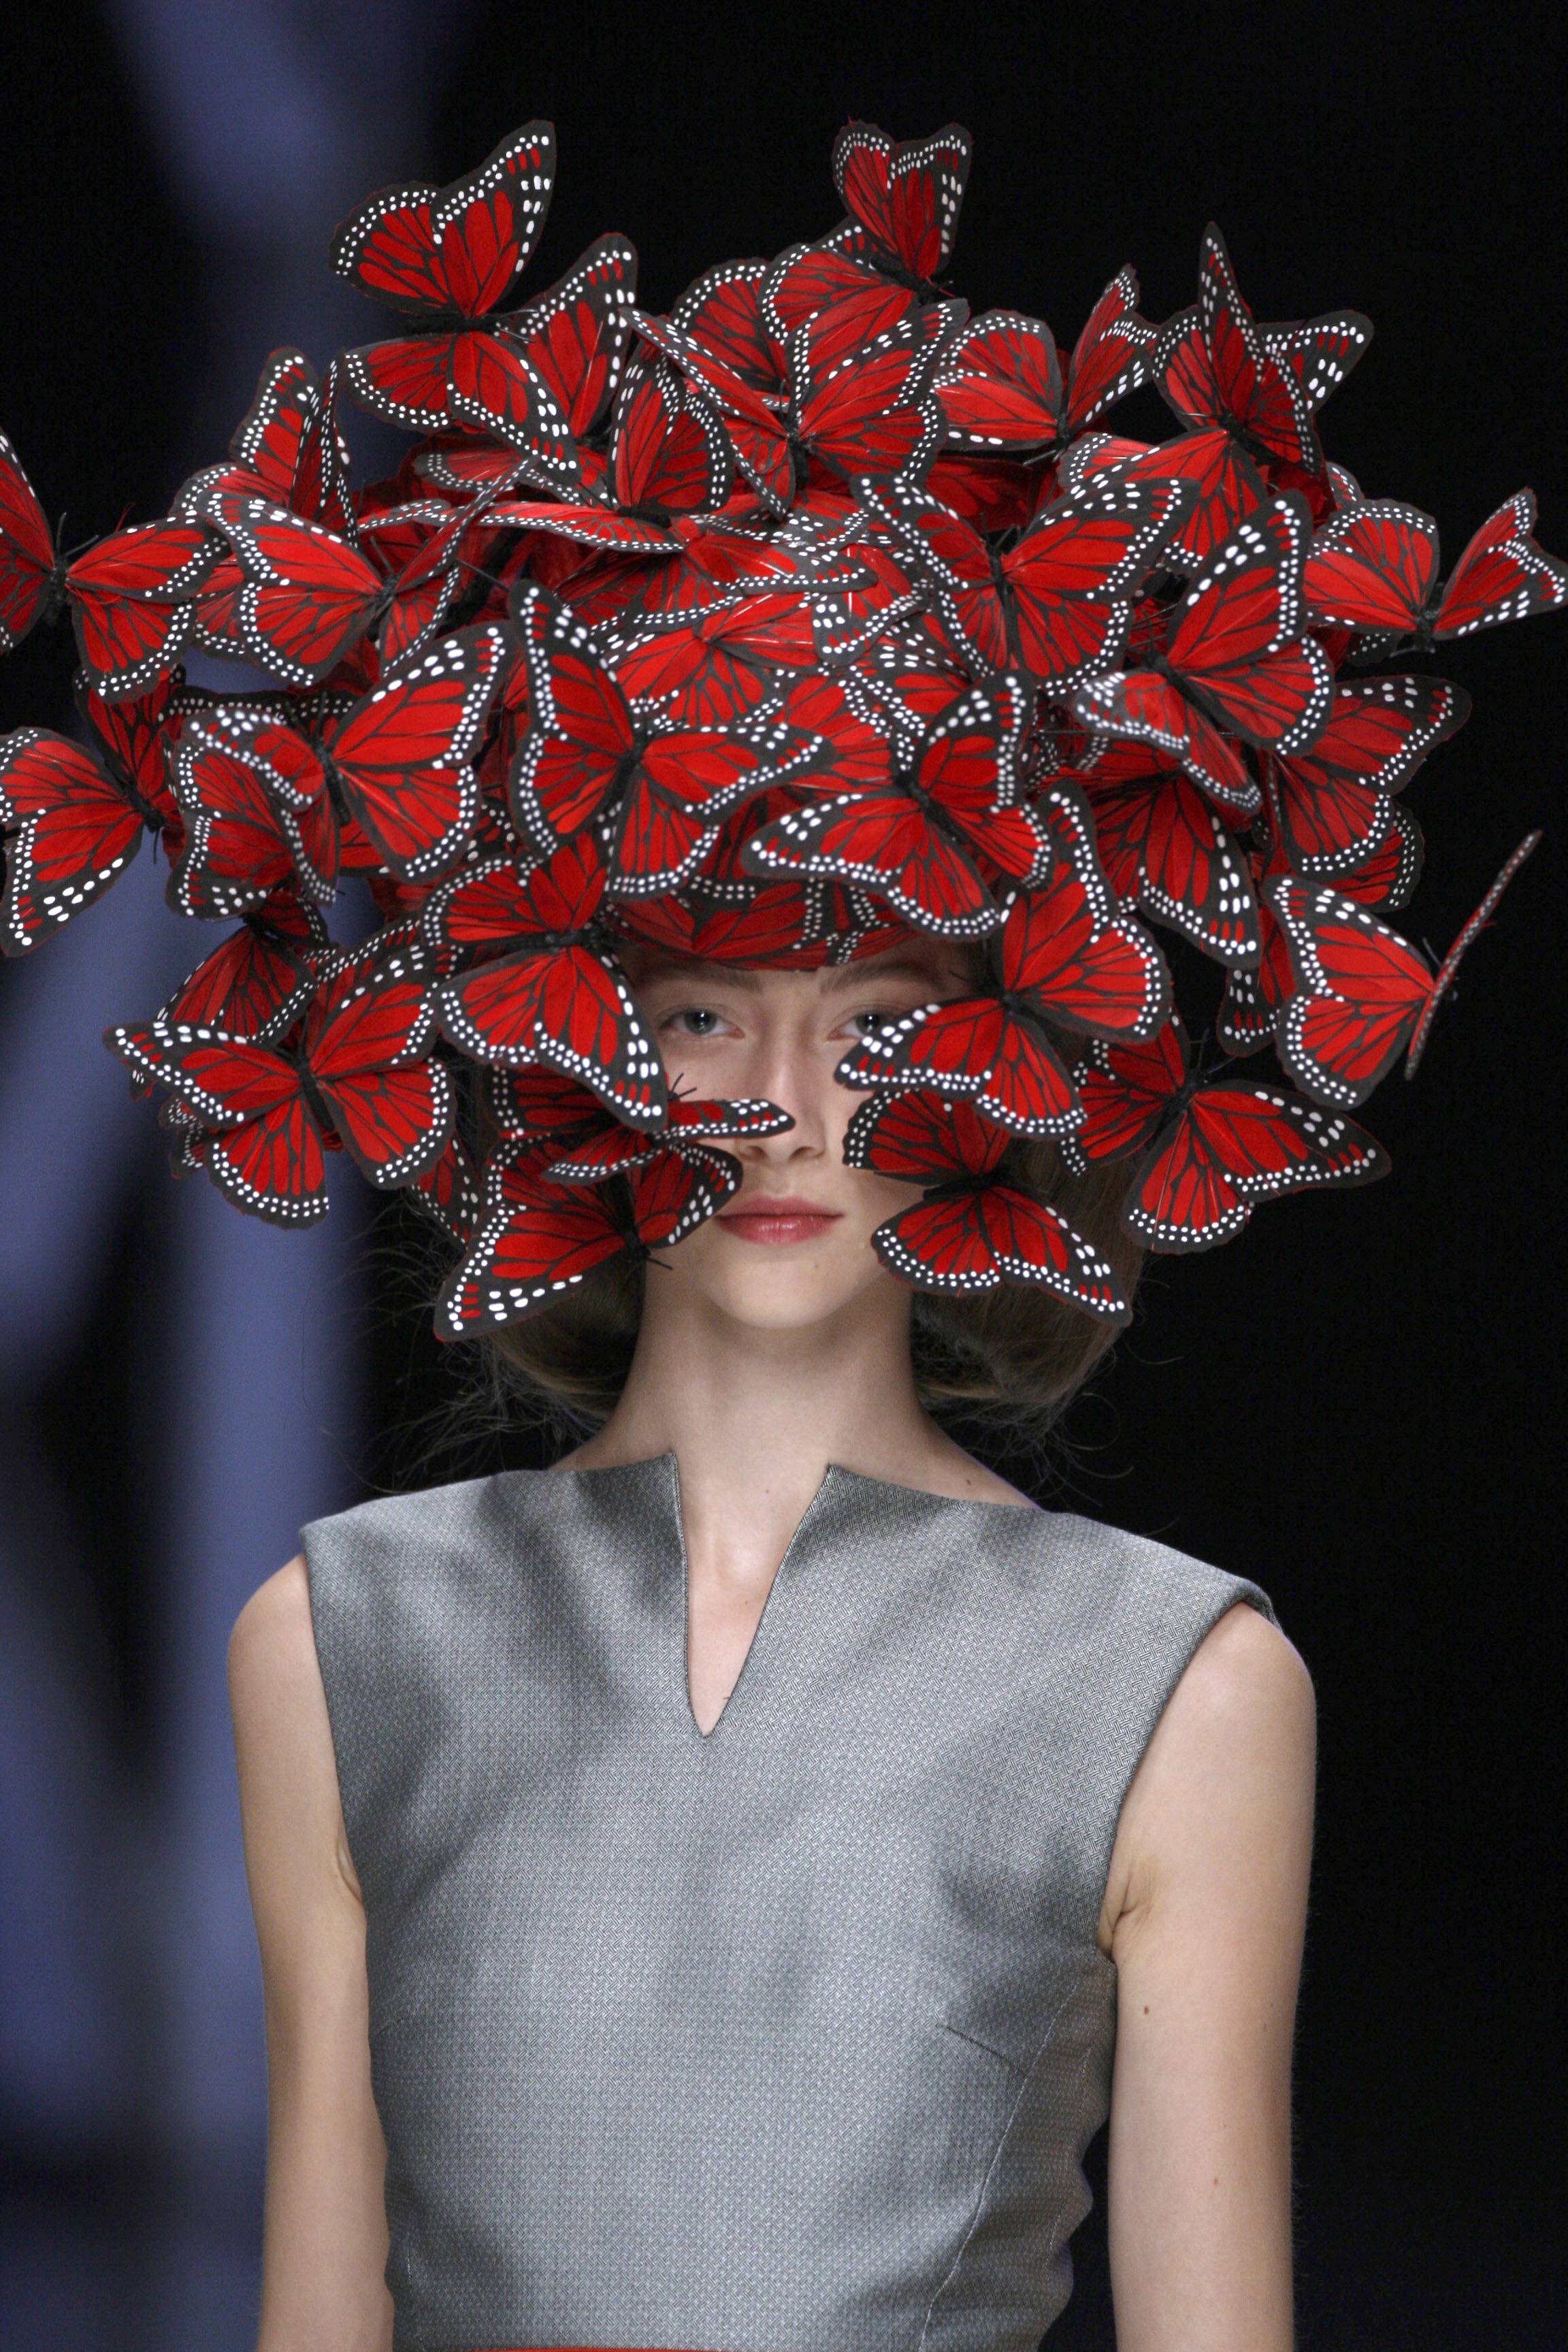 2. Butterfly headdress of hand-painted turkey feathers, Philip Treacy for Alexander McQueen, La Dame Bleu, Spring Summer 2008, copyright Anthea Sims